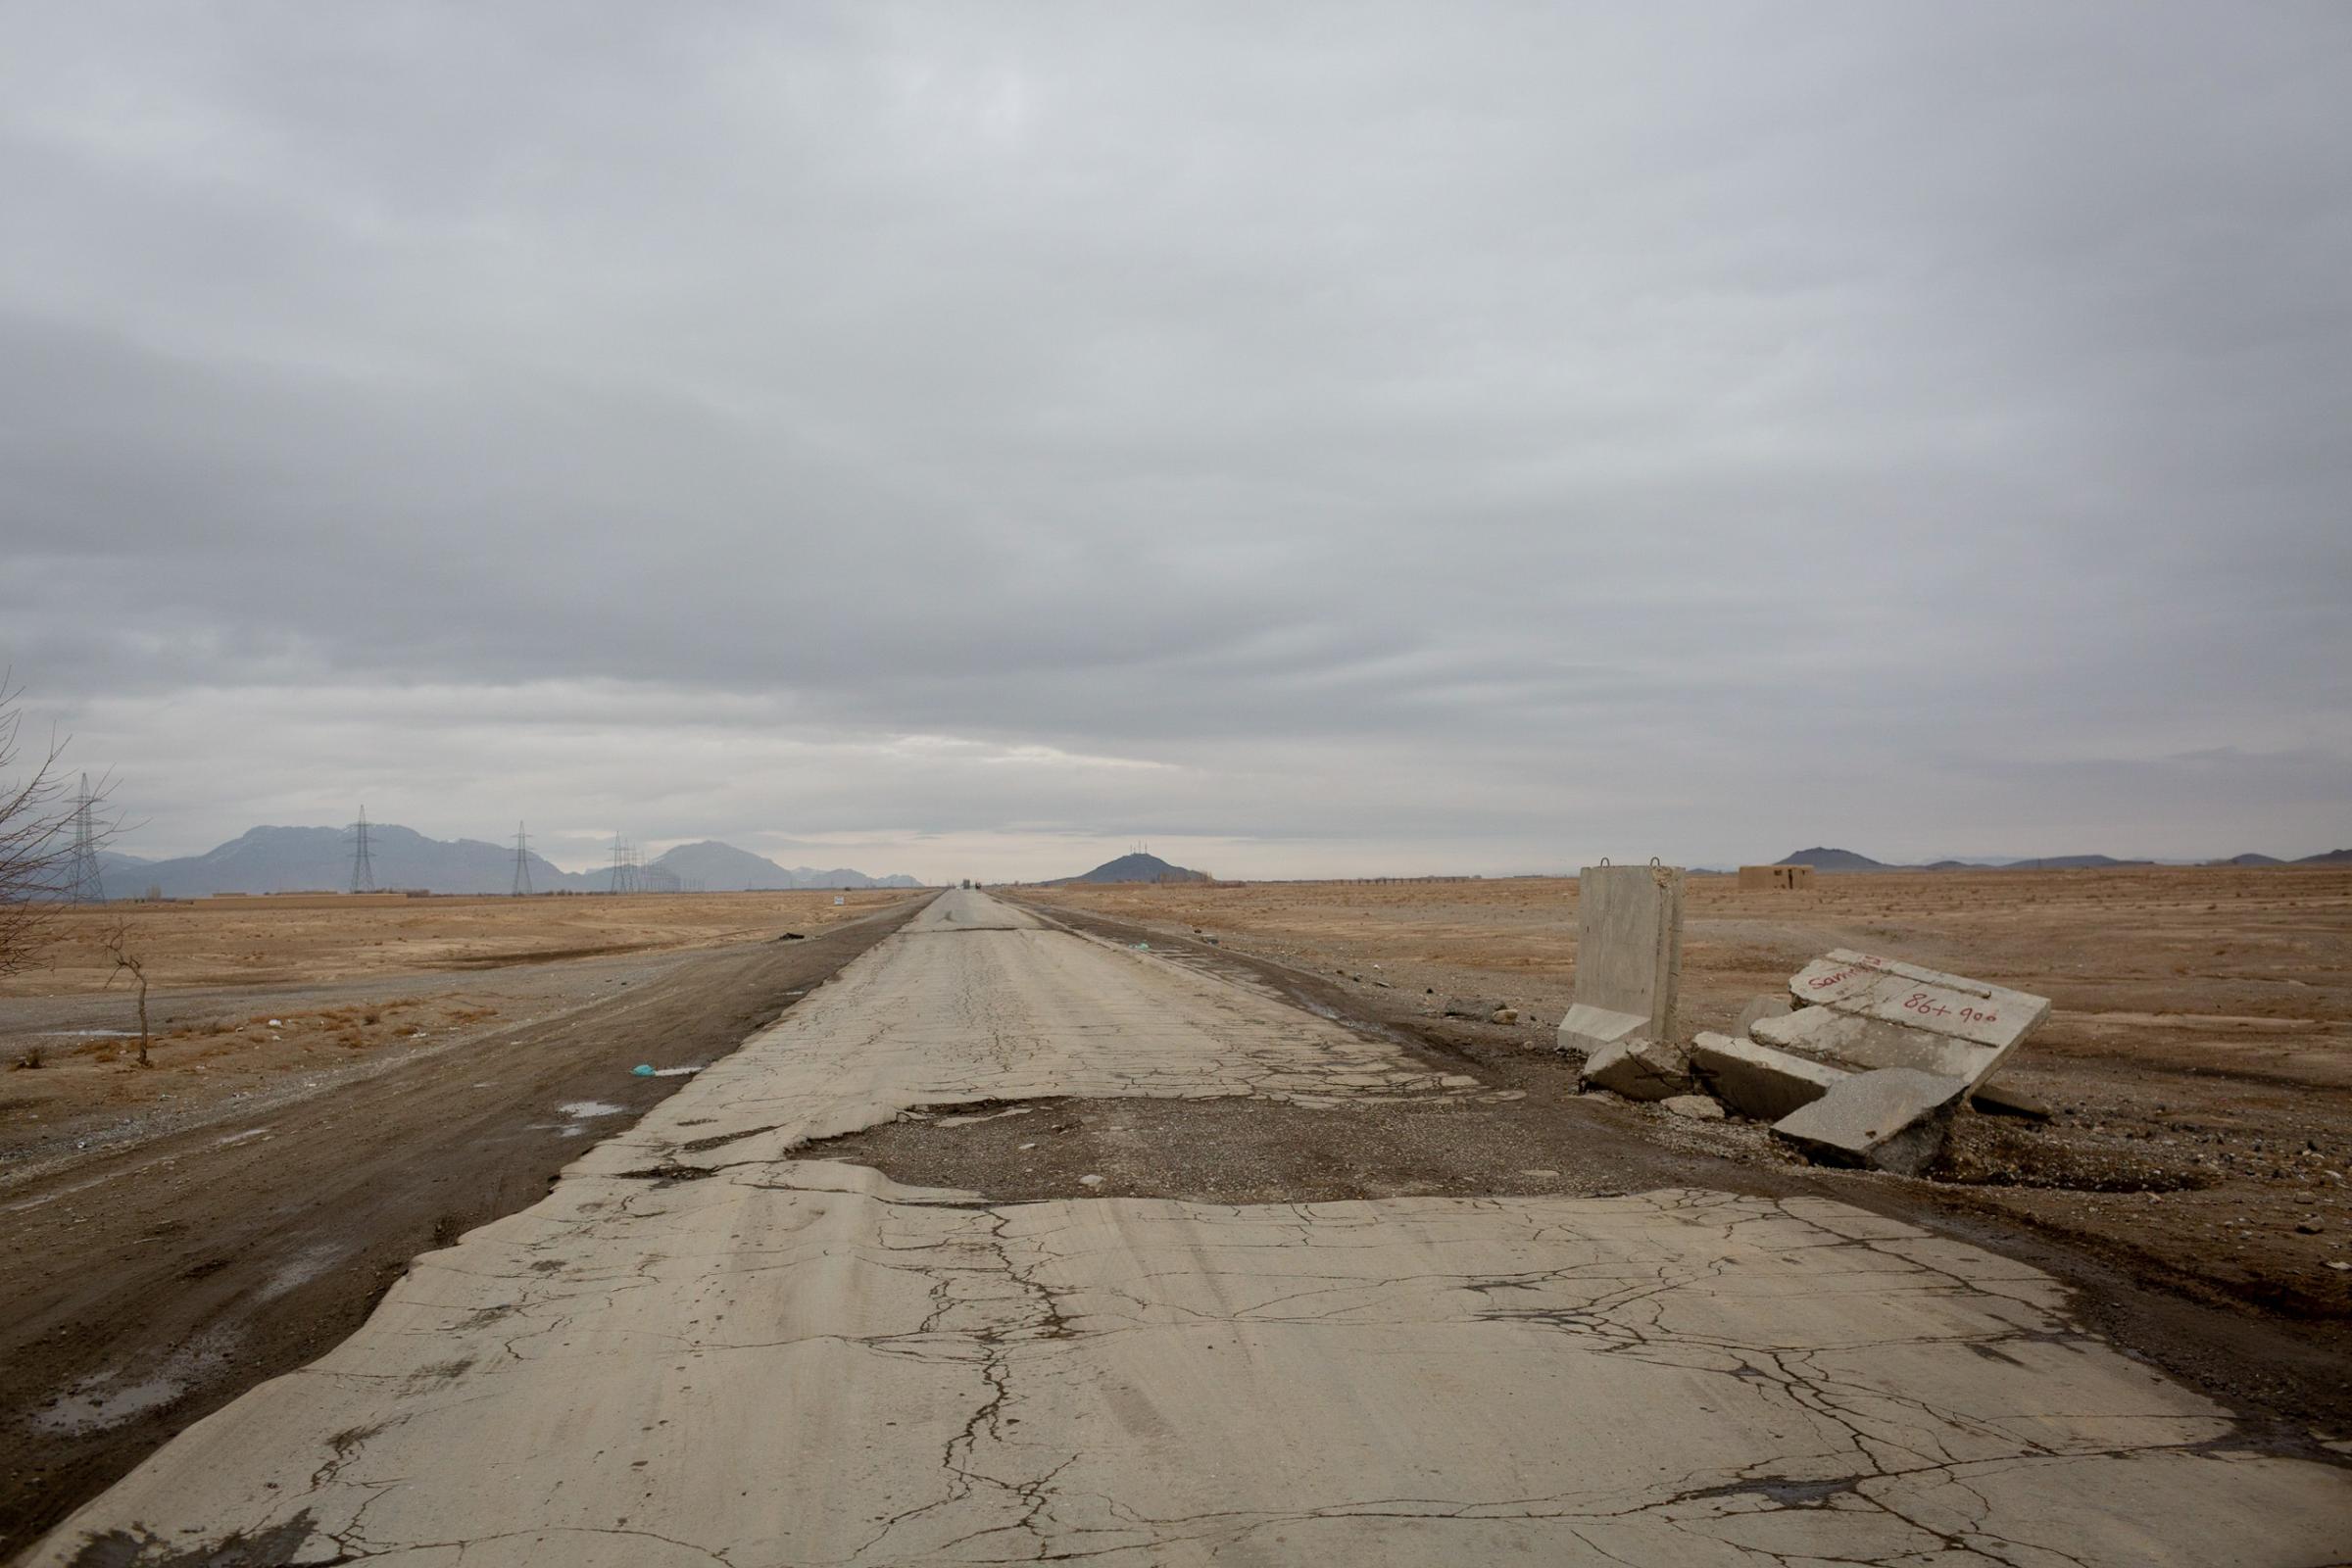 The Kabul-Kandahar expressway was supposed to win the hearts and minds of Afghans. Today, it is...